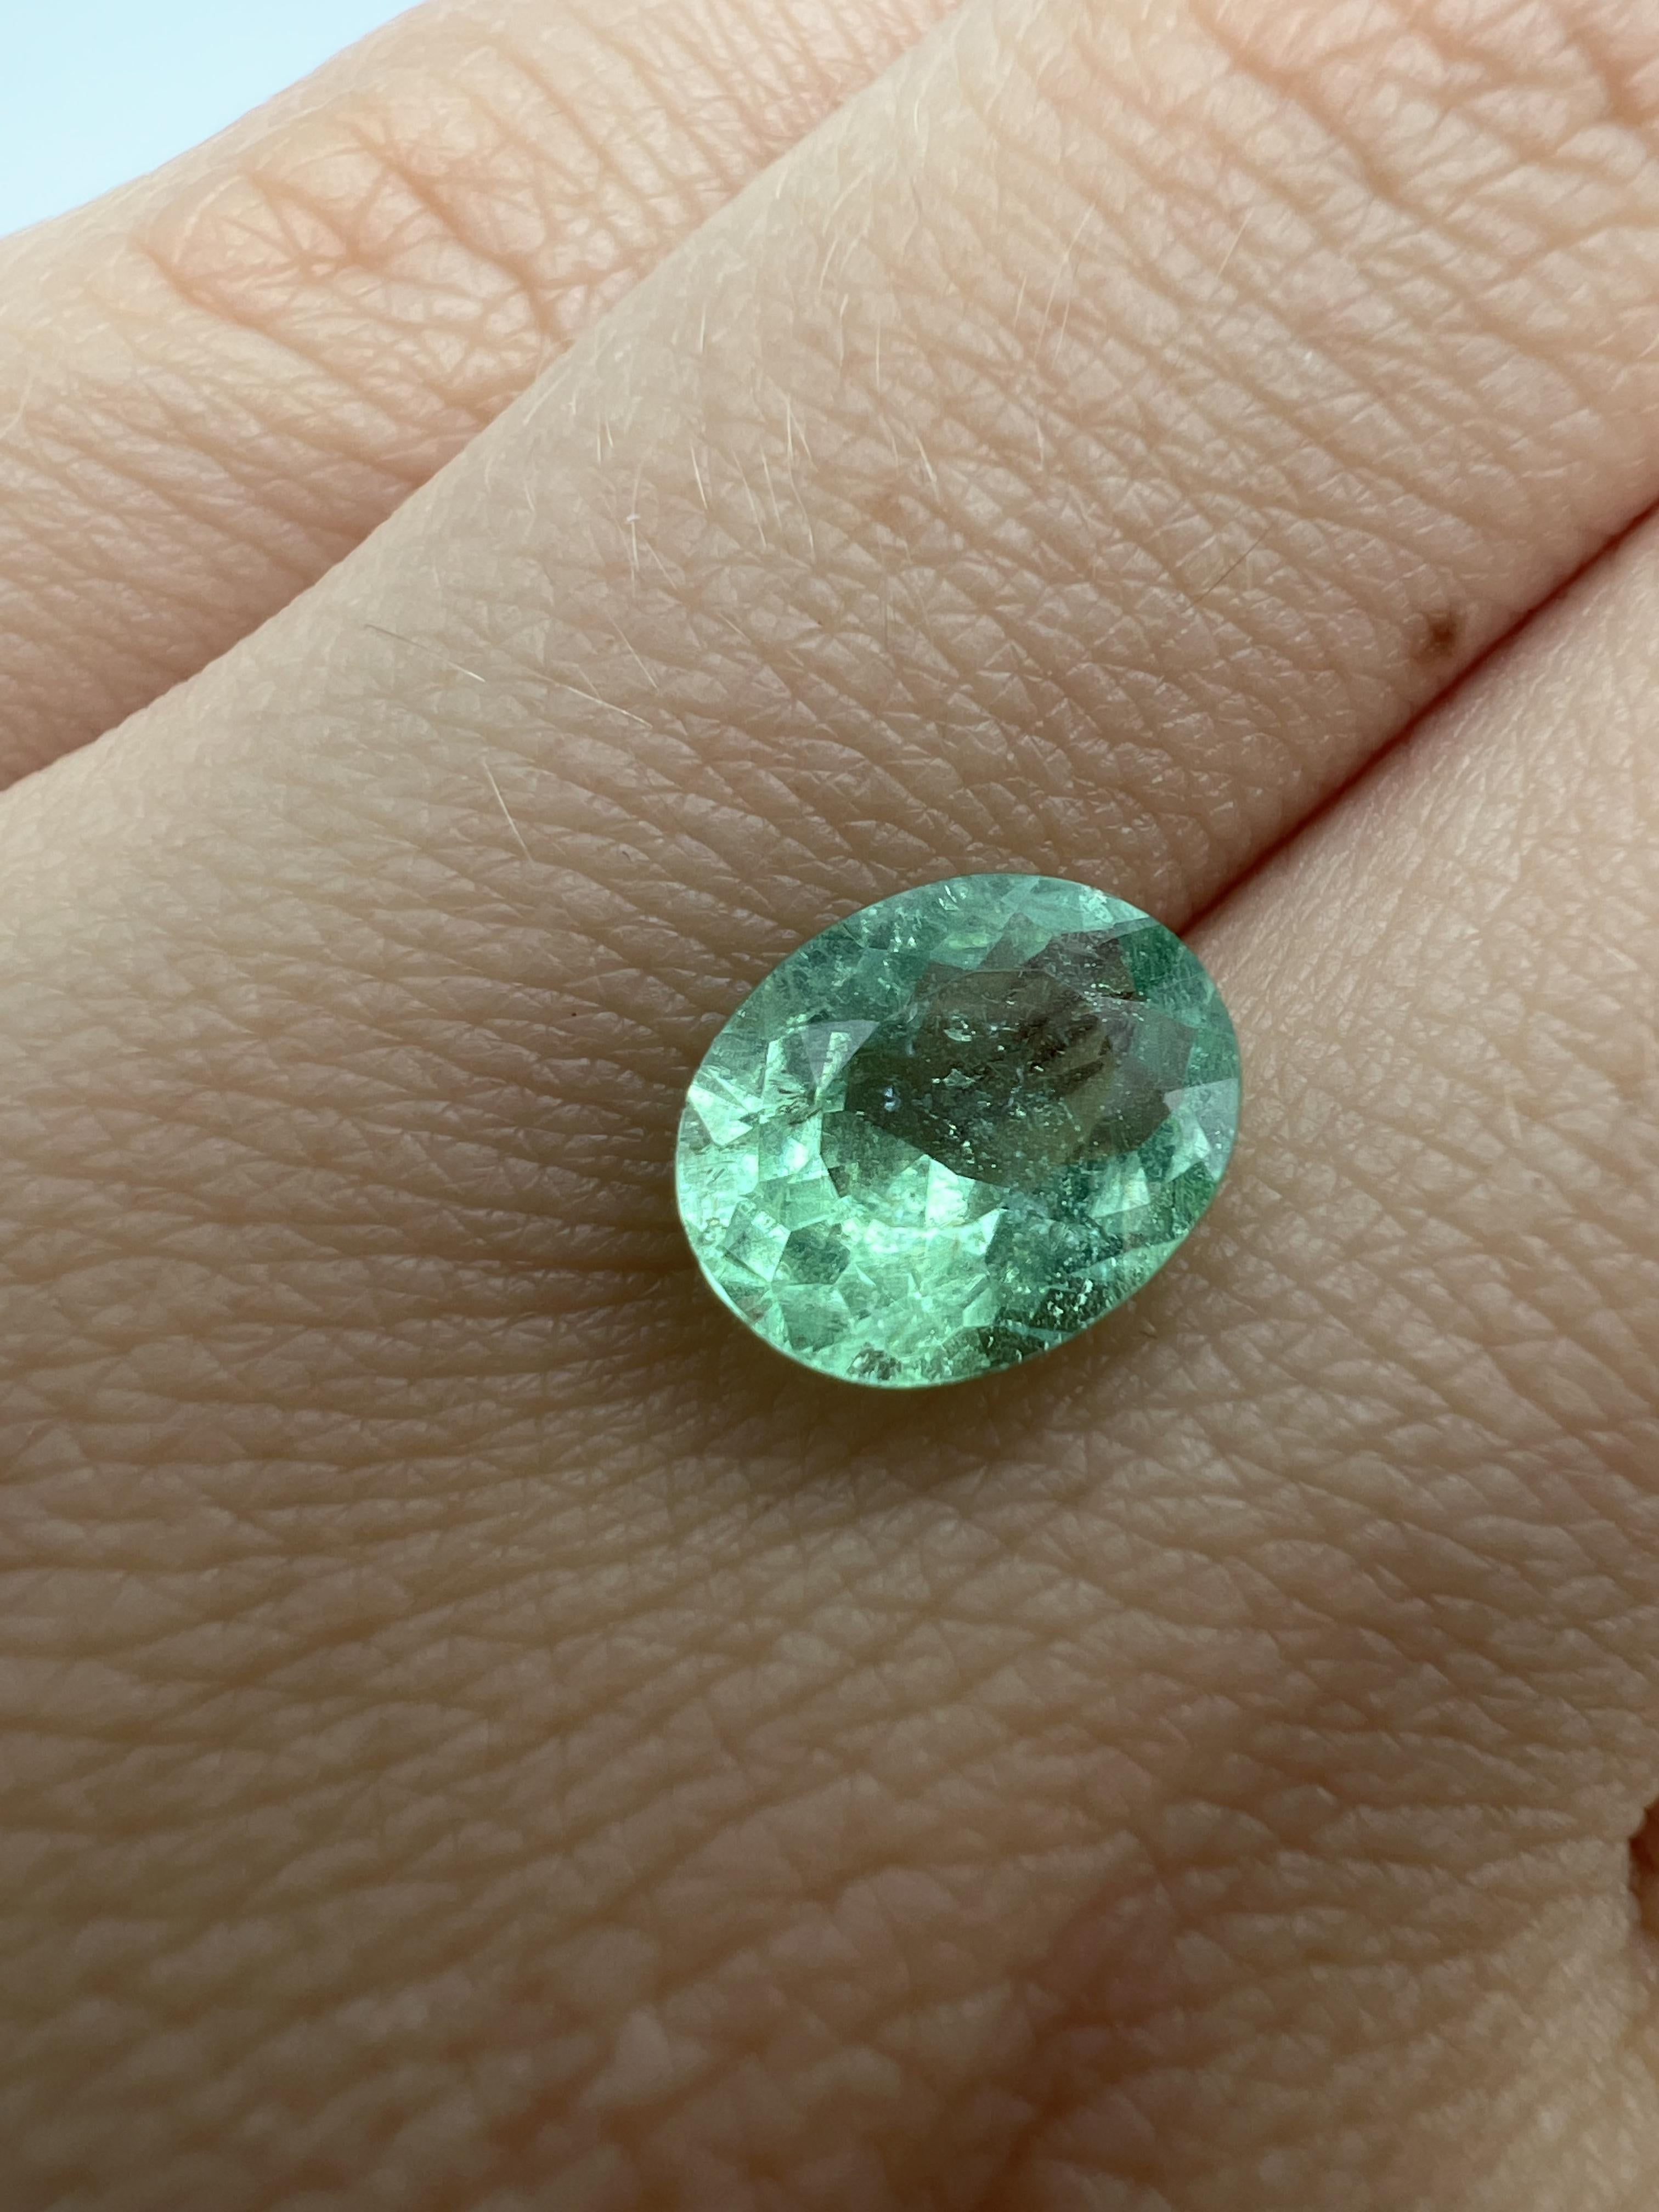 Brilliant Cut GIA Certified 1.84ct Natural Mozambique Paraiba Tourmaline, Gemstone For Jewelry For Sale